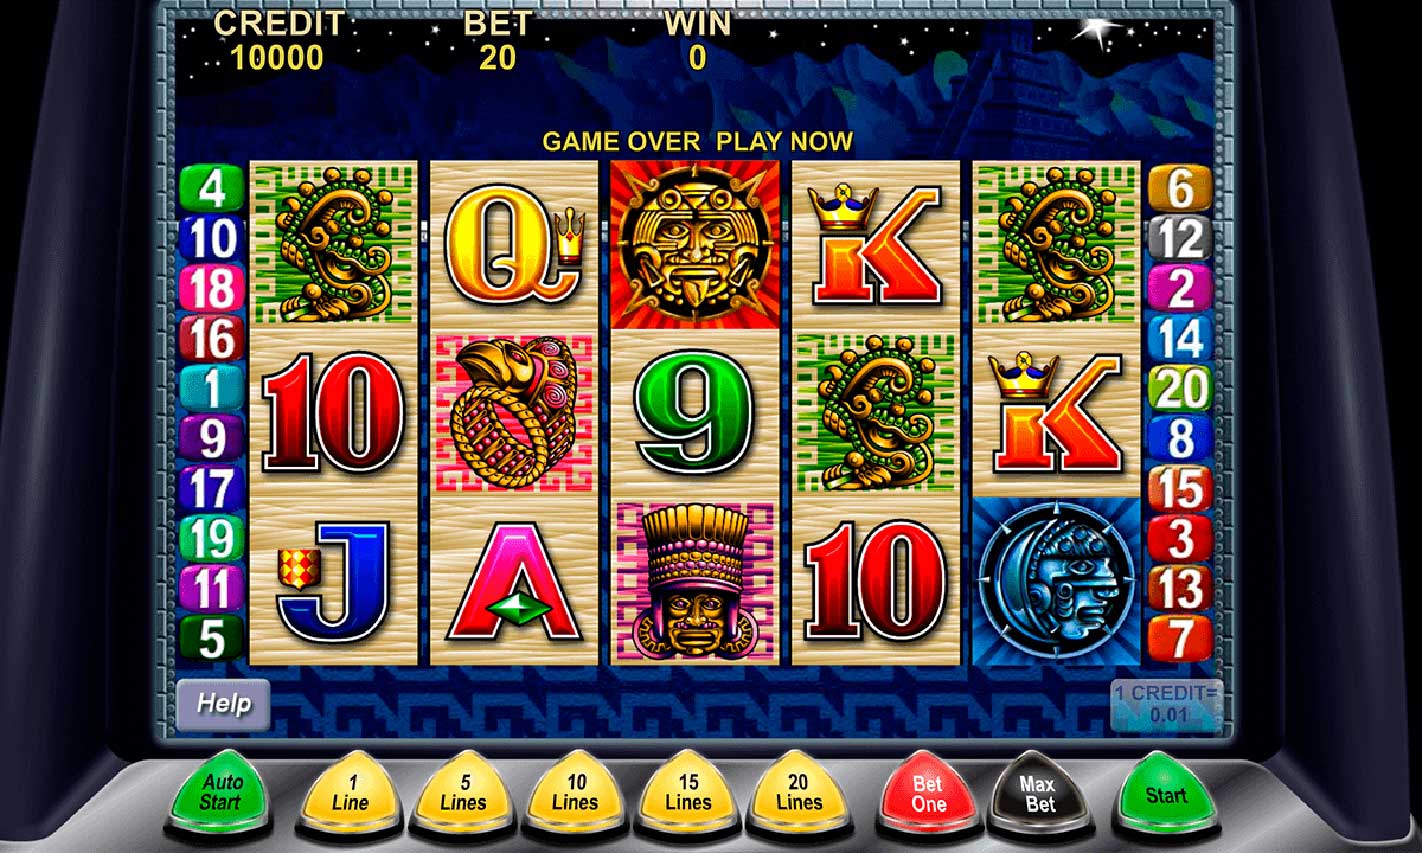 Can you rig an online slot game? – Royal City Casino